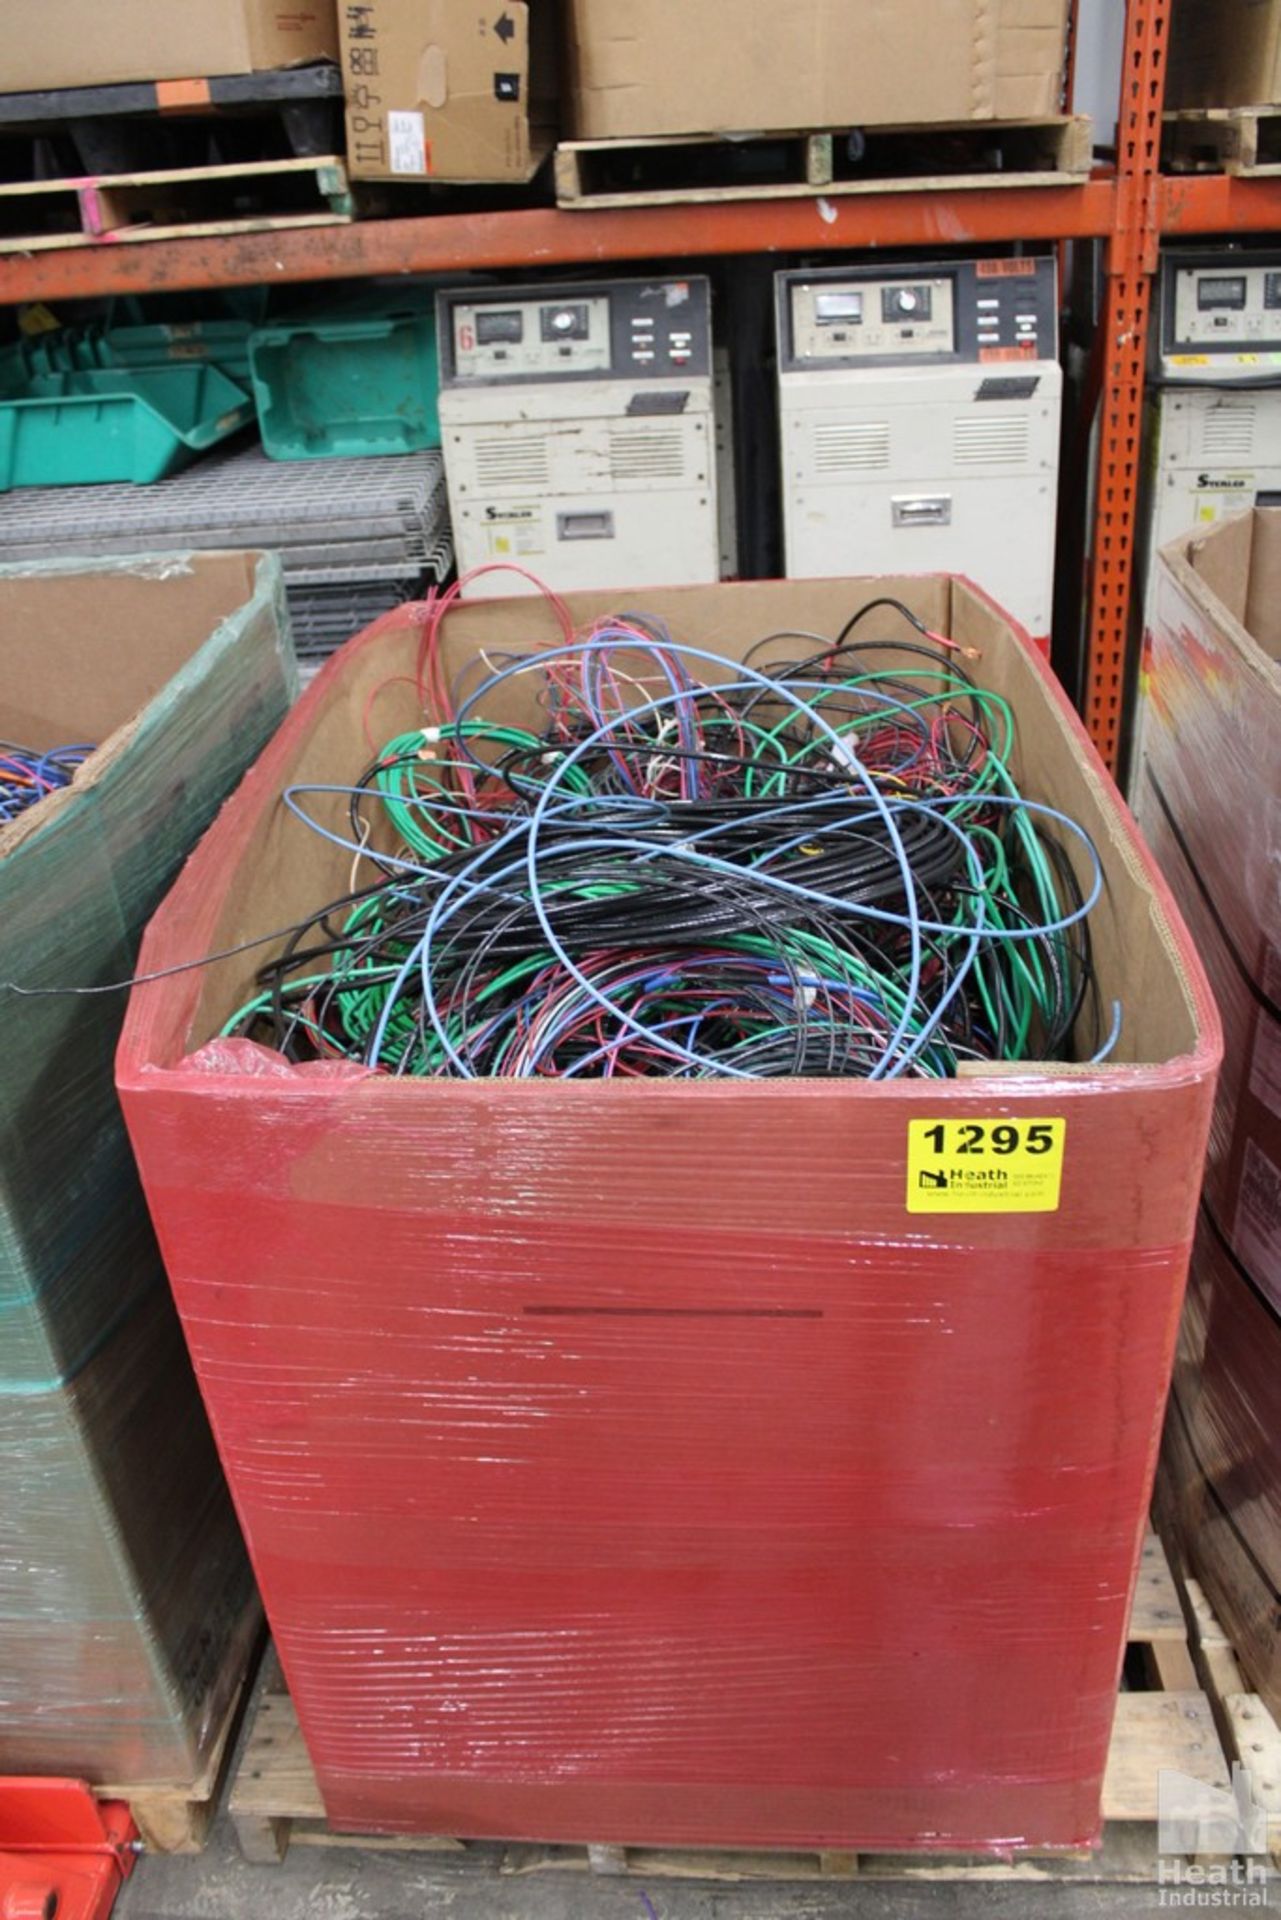 LARGE QUANTITY OF COPPER WIRE CUTOFFS IN GAYLORD - Image 4 of 4